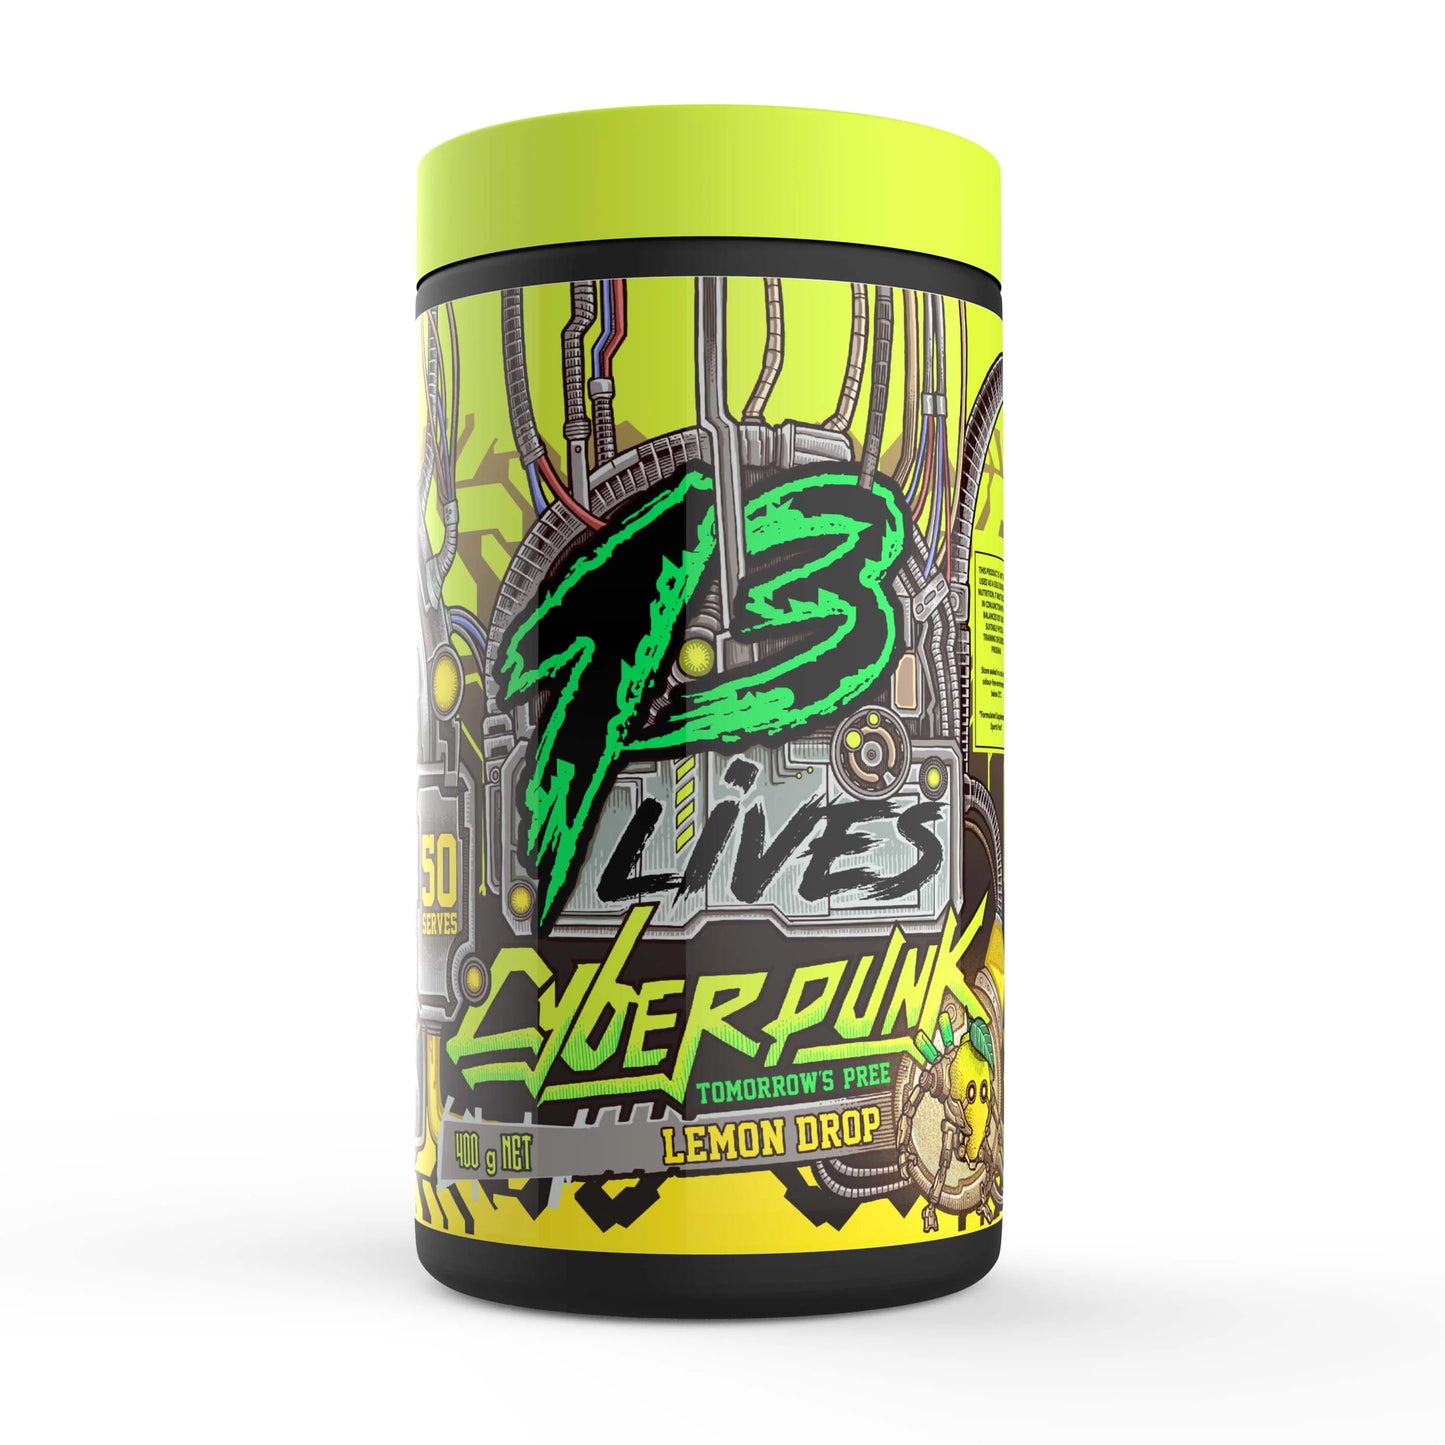 13 Lives Cyber Punk 400g, Pump Energy & Focus {Elevate Your Training With A Preworkout}